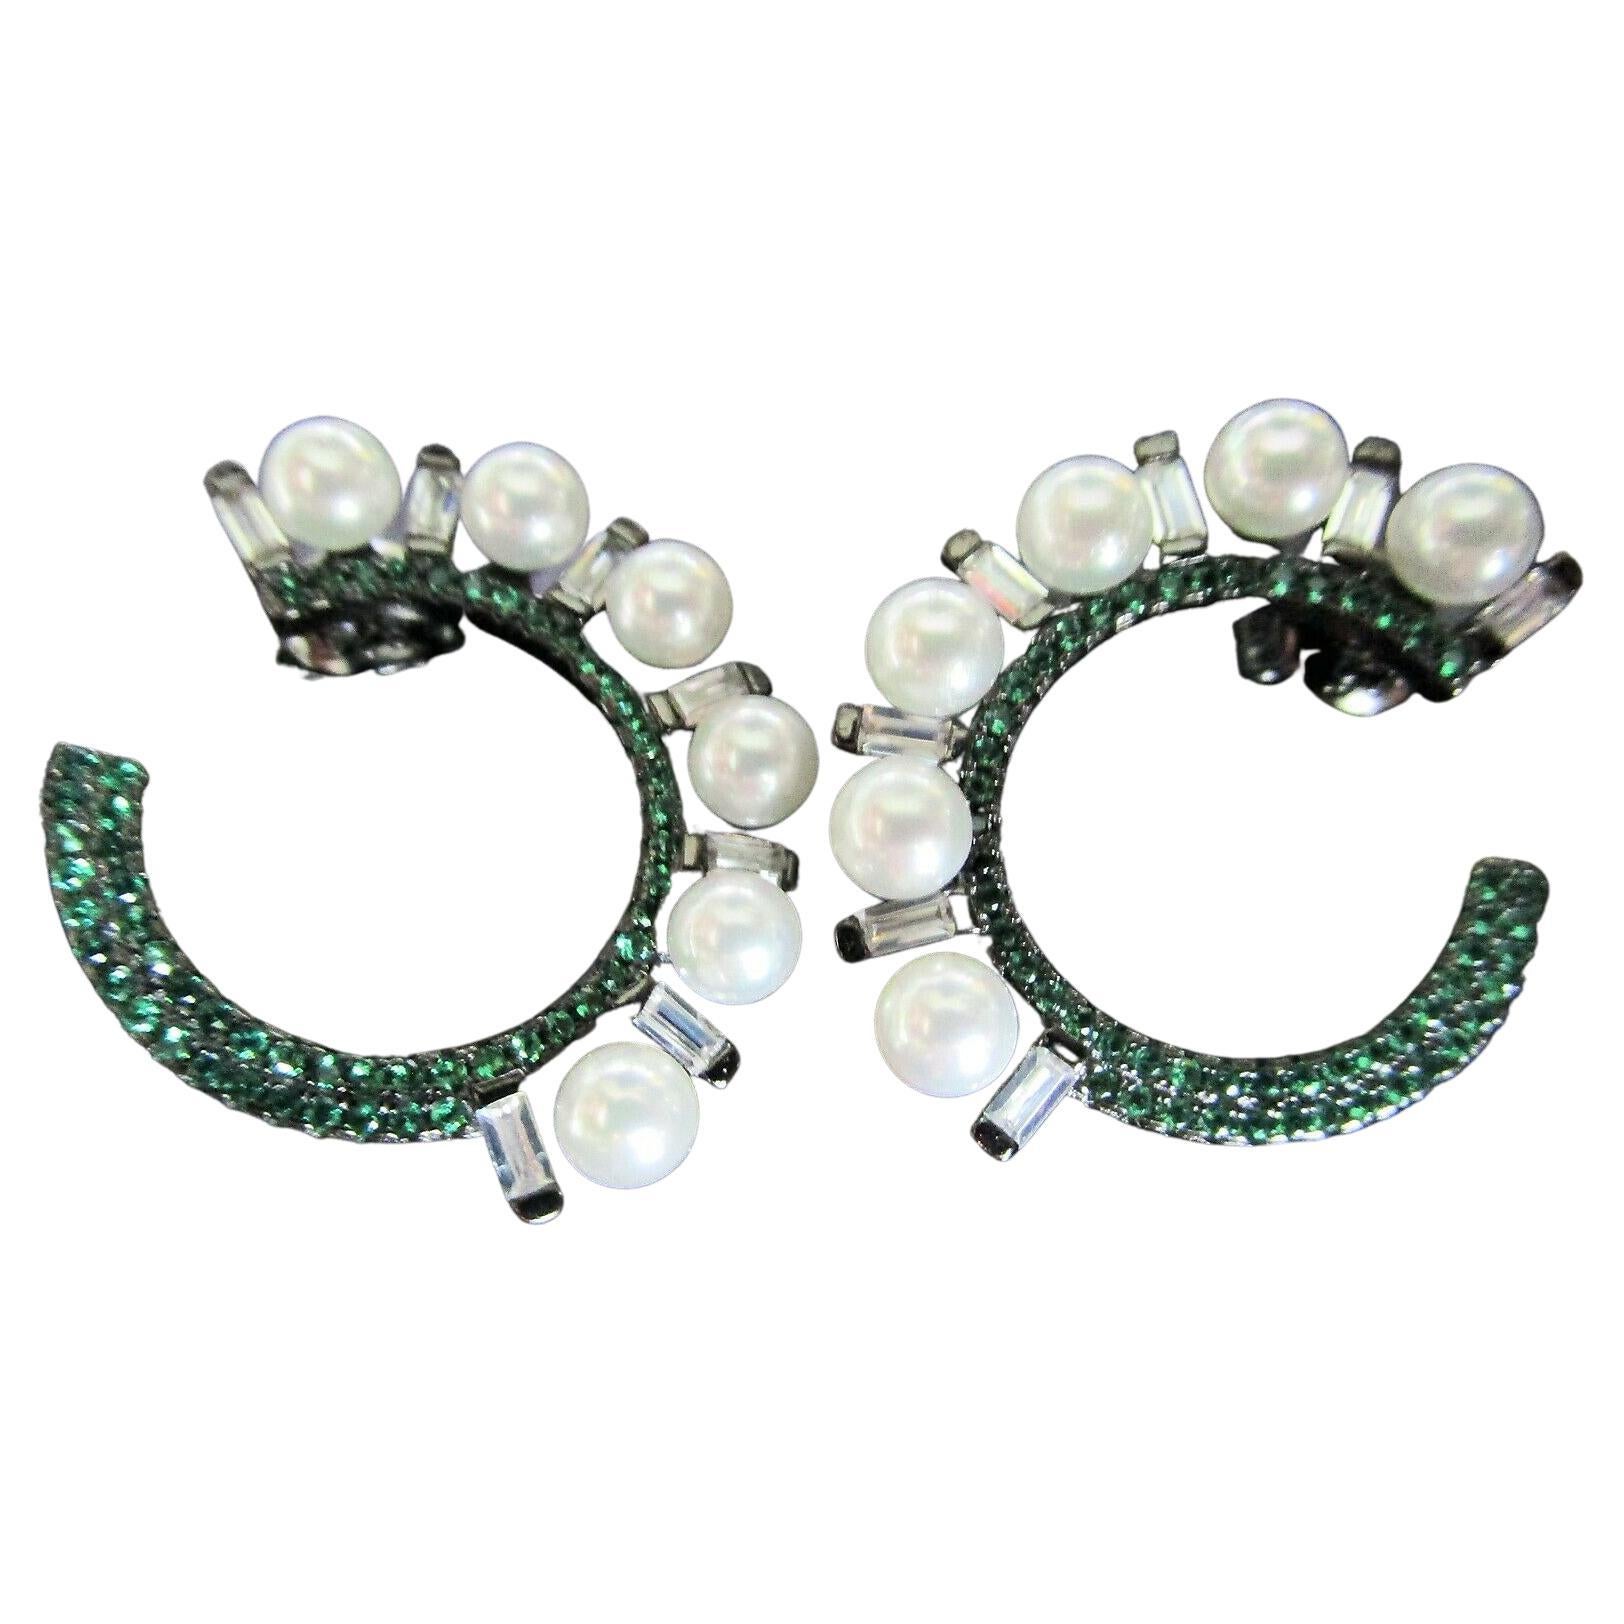 Emerald Green Sparkling Ice CZ Faux Pearl Sterling Silver Hoop Earrings For Sale